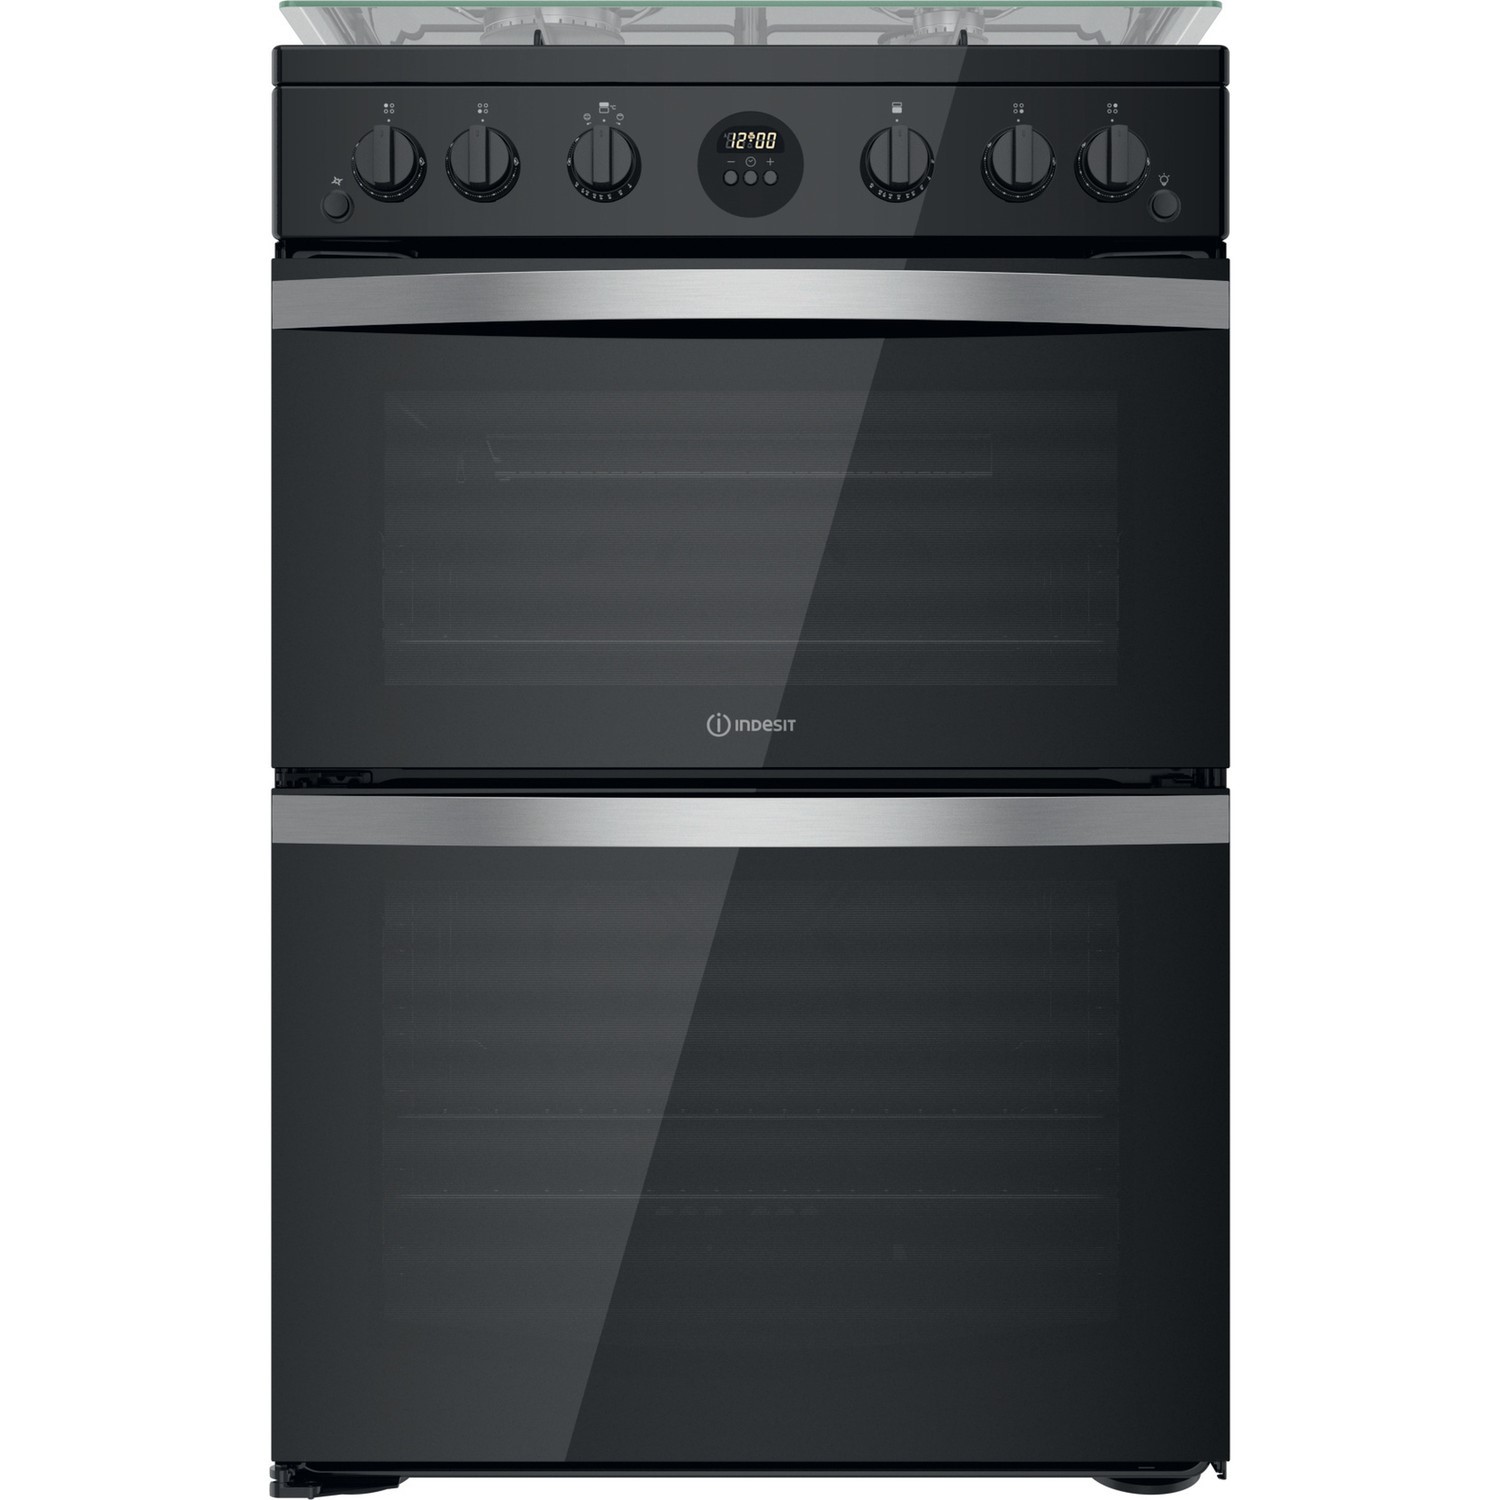 Indesit 60cm Double Oven Gas Cooker with Catalytic Liners - Black